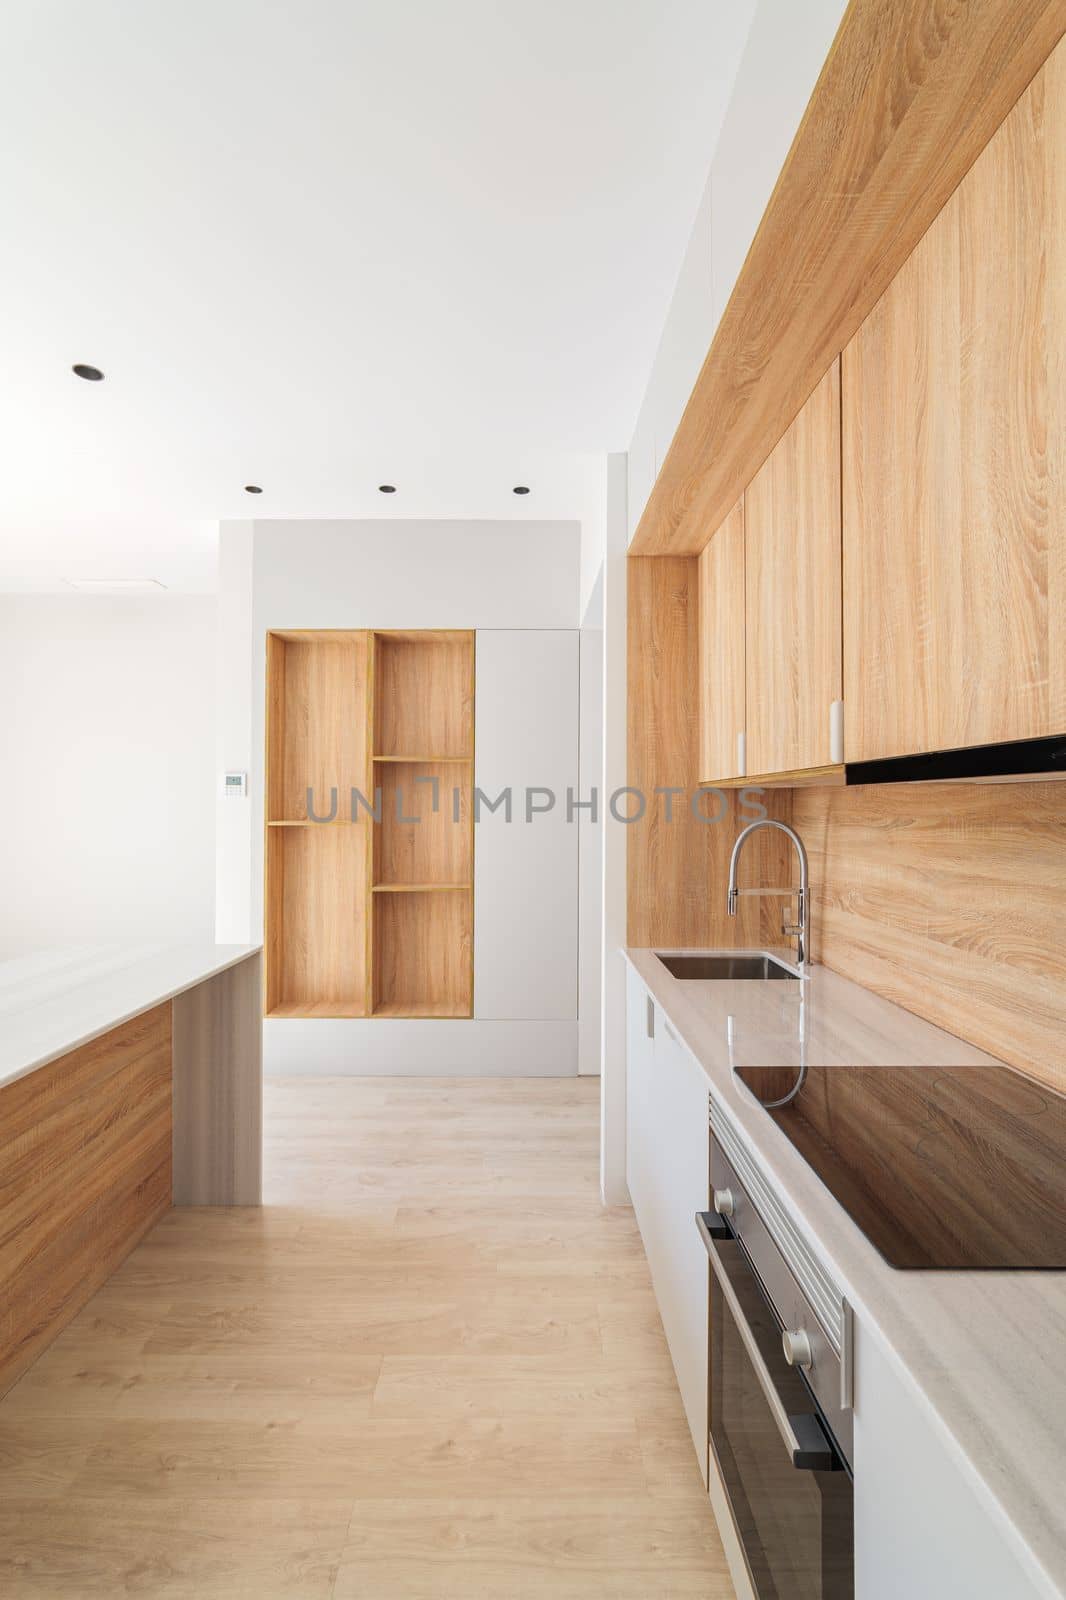 Along the wall is a modern kitchen with light wood cabinets. The marble top has an integrated induction hob and sink. In the doorway you can see a rack with shelves in the same style as the kitchen